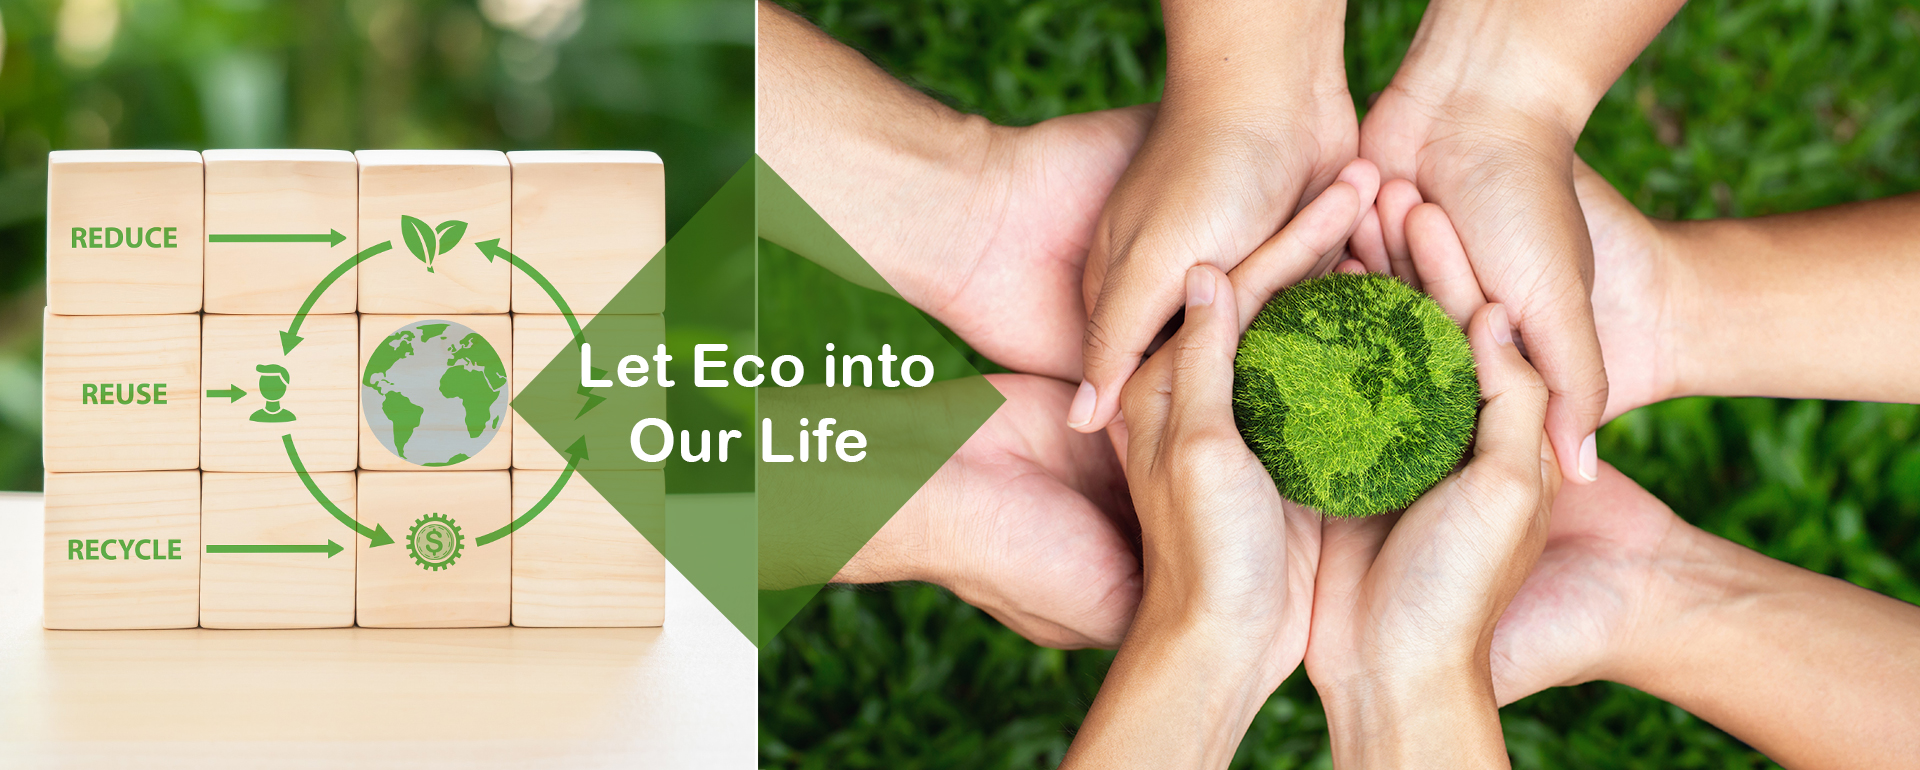 let eco into our life.jpg